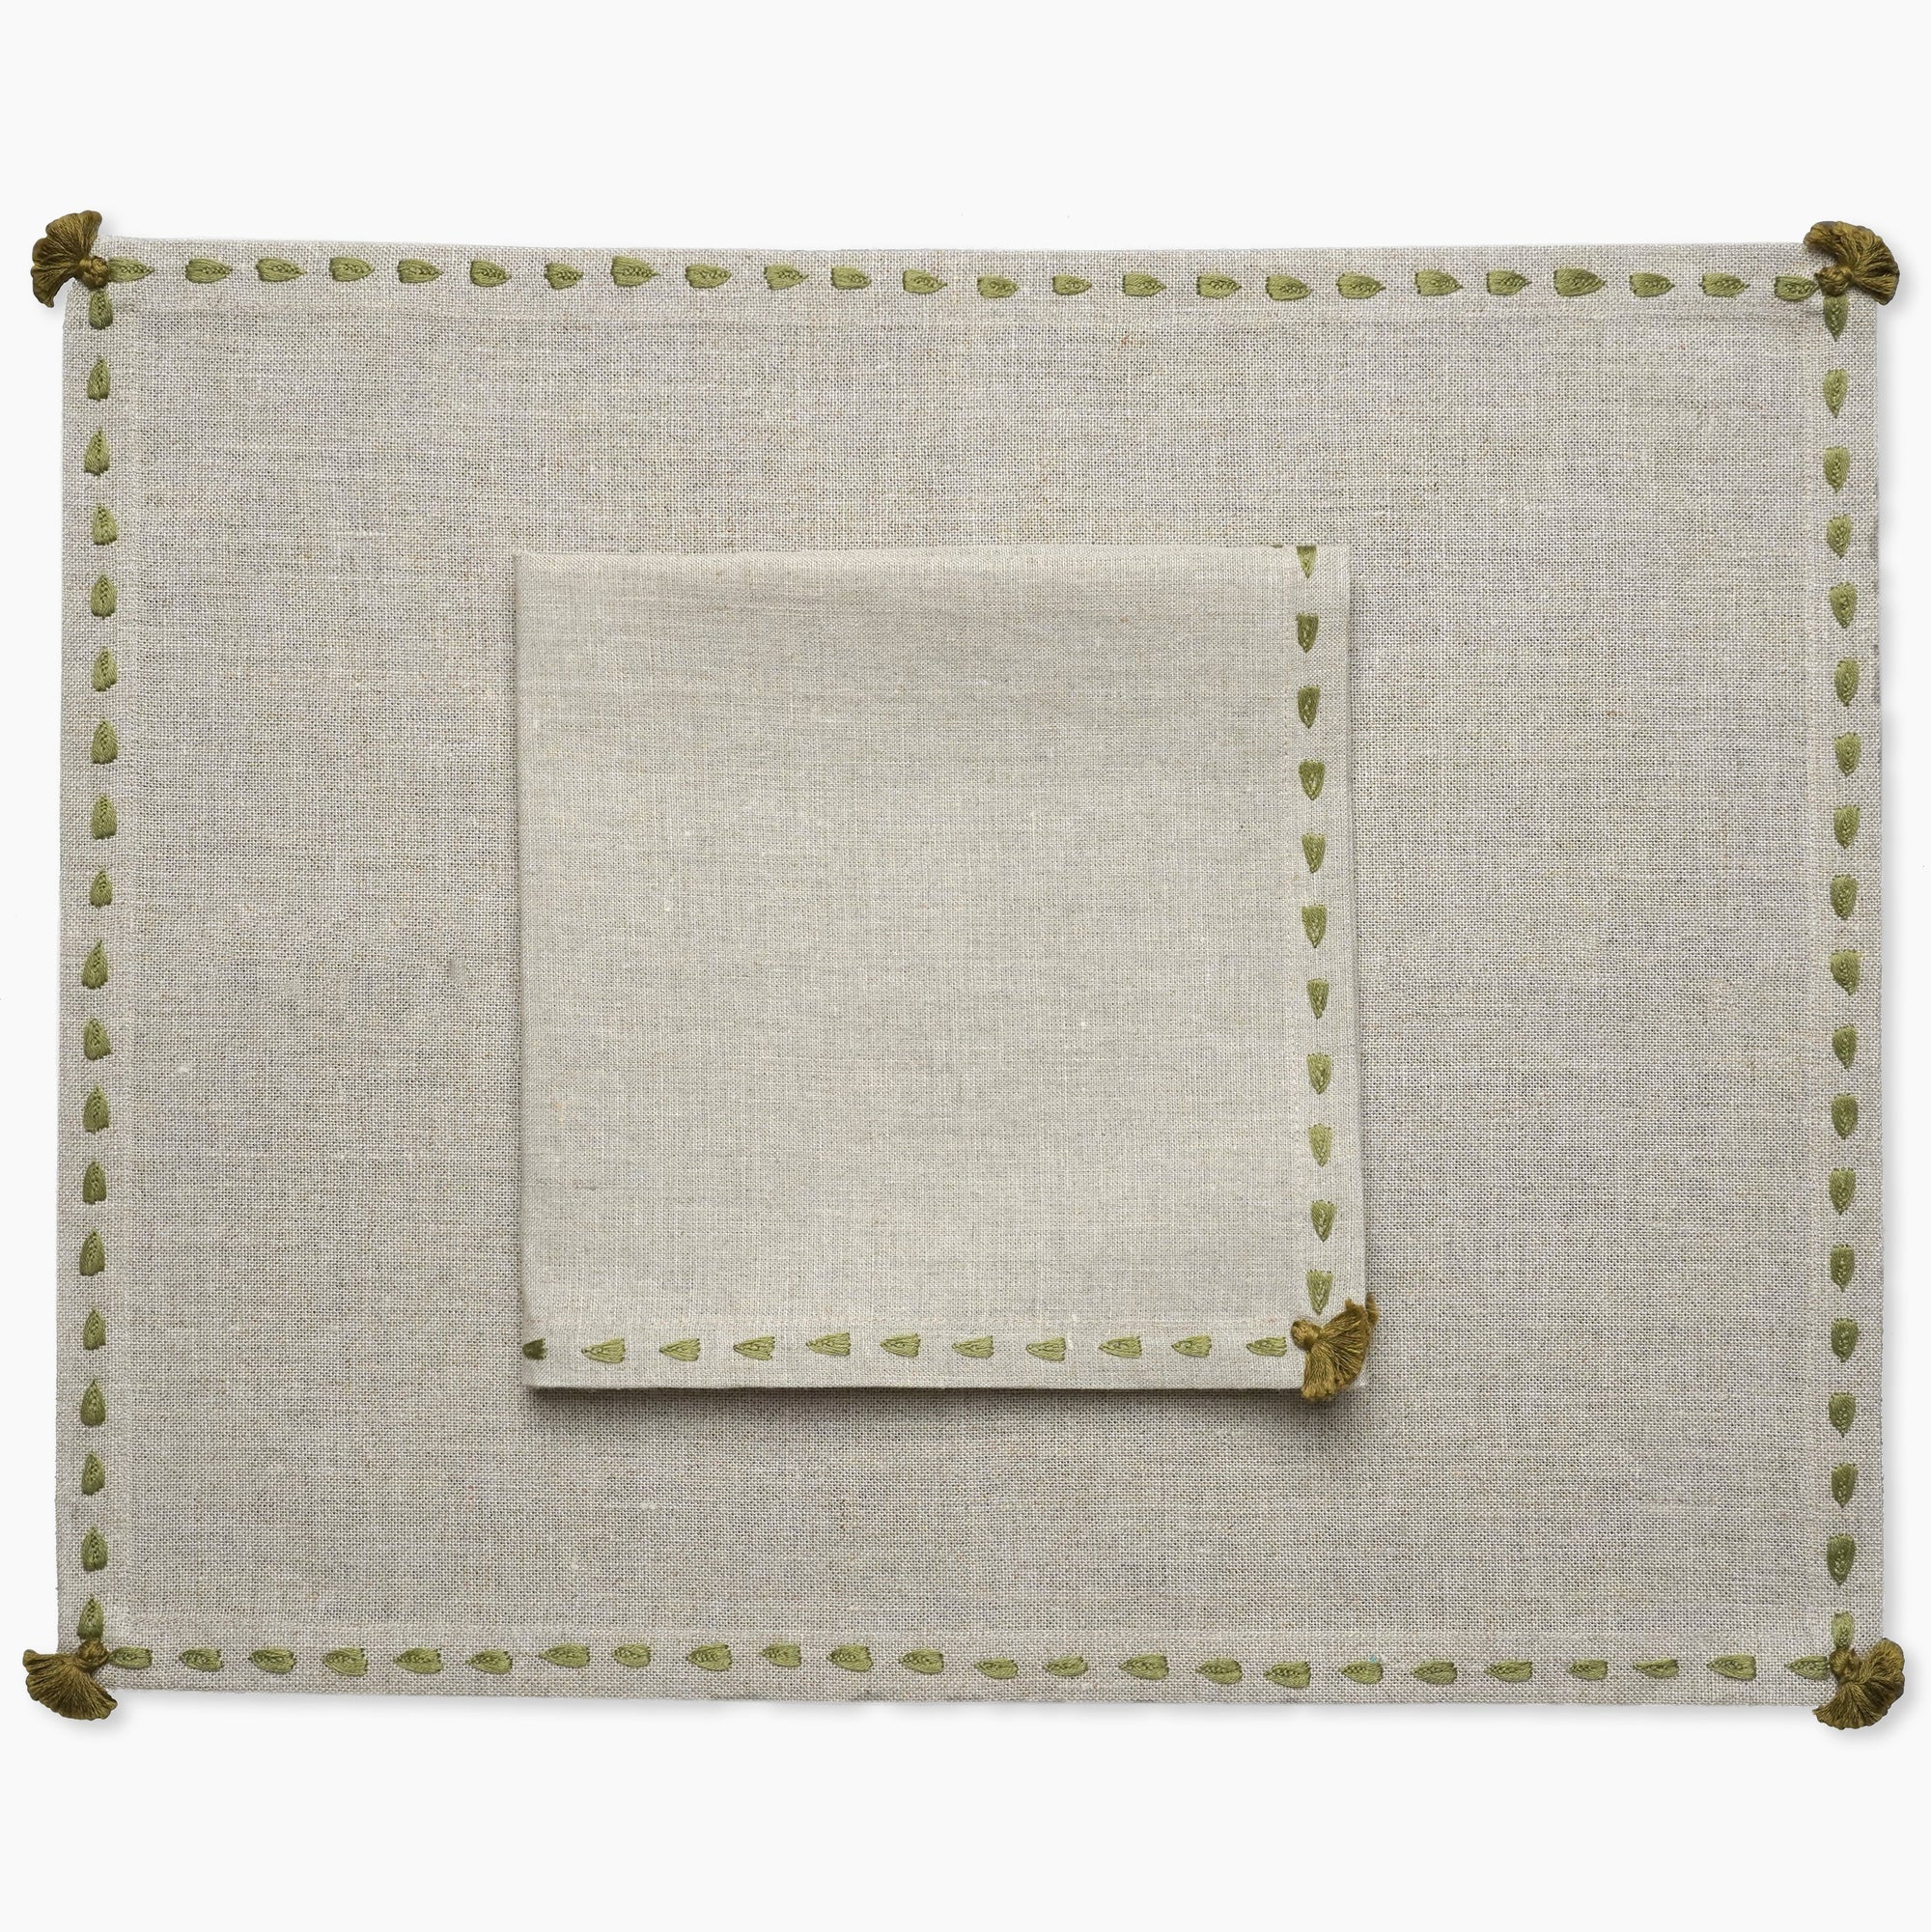 Beige linen placemat with green hand embroidered border from artha collections